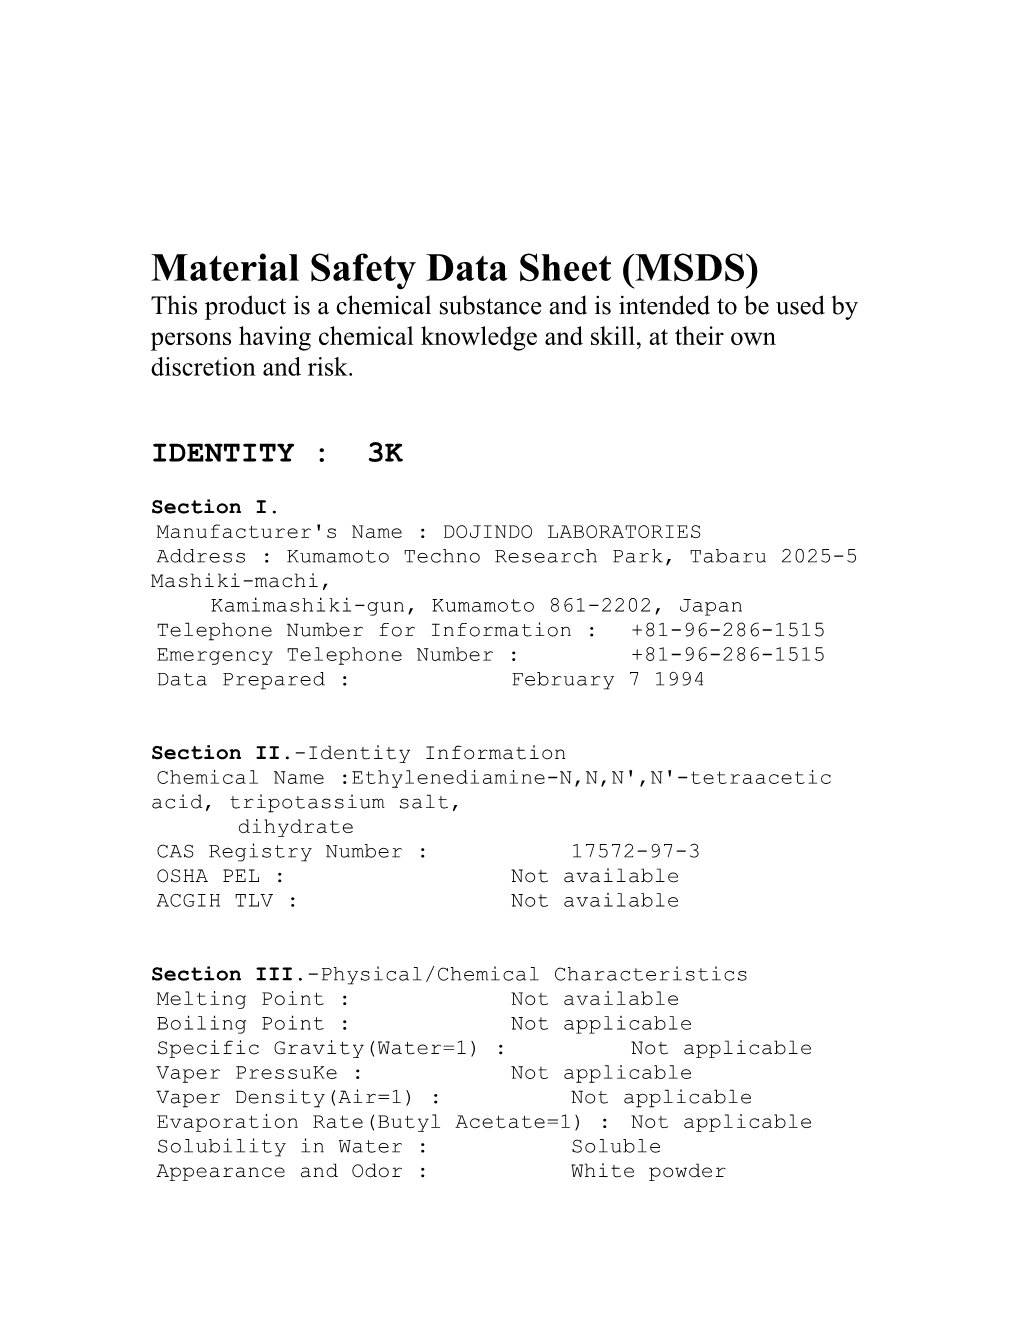 Material Safety Data Sheet (MSDS) s3